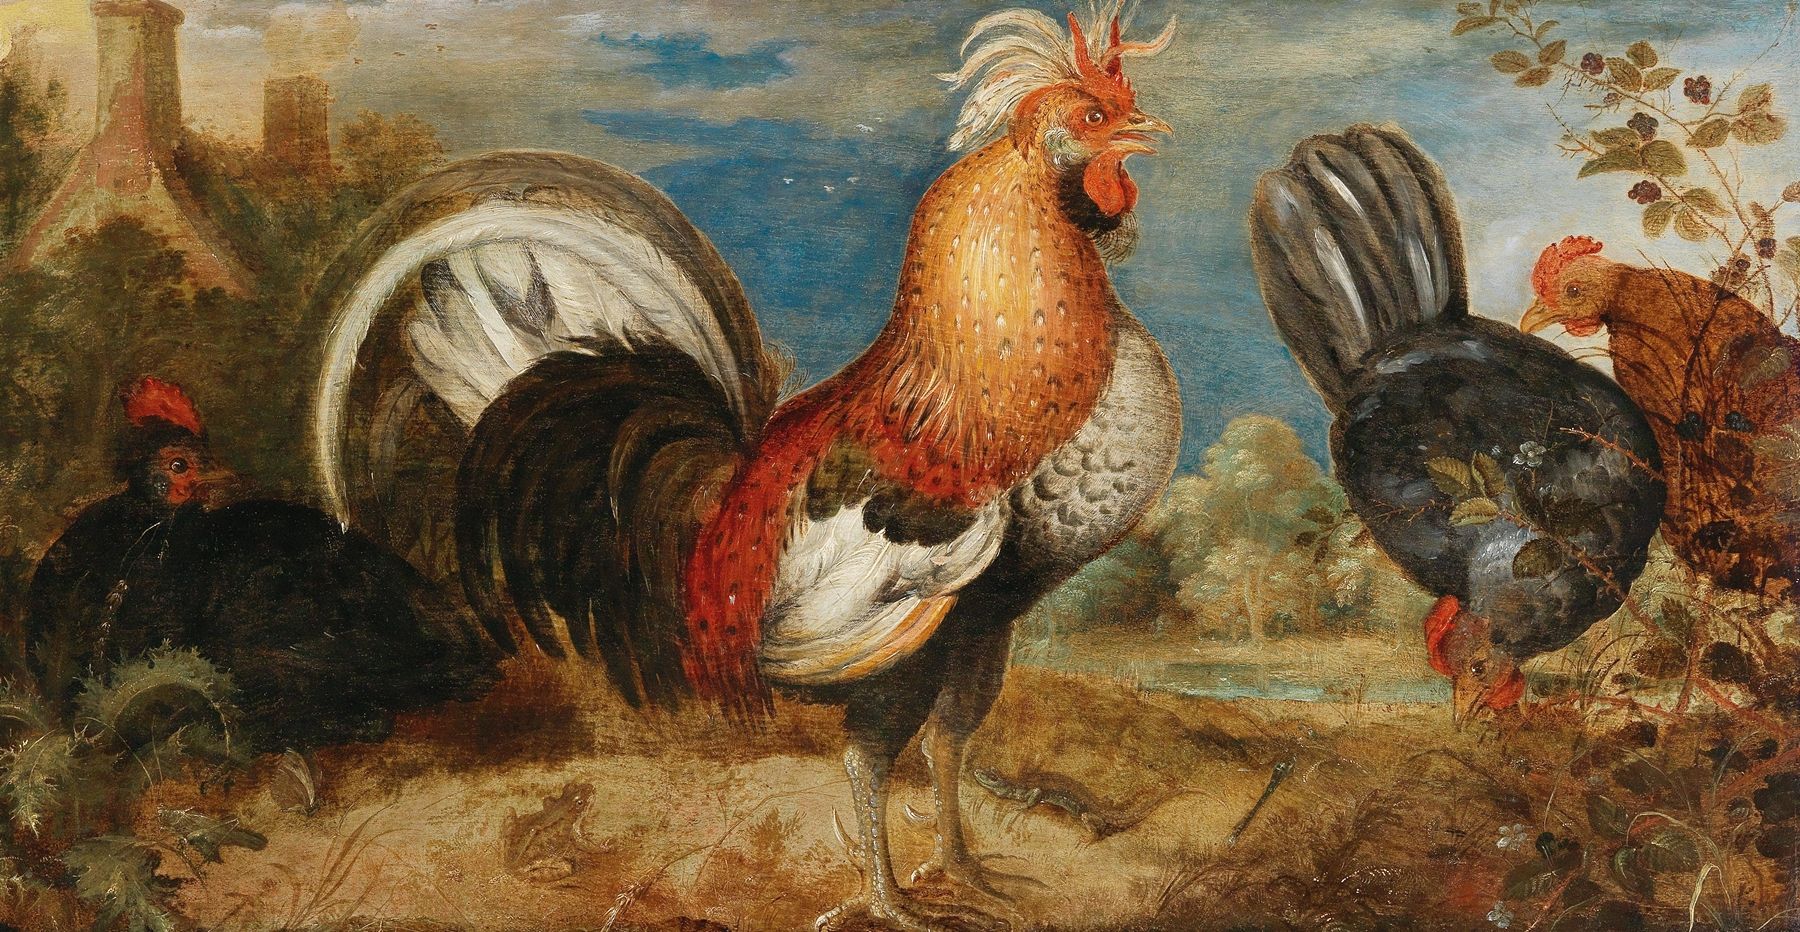 The Night-Crowing Rooster